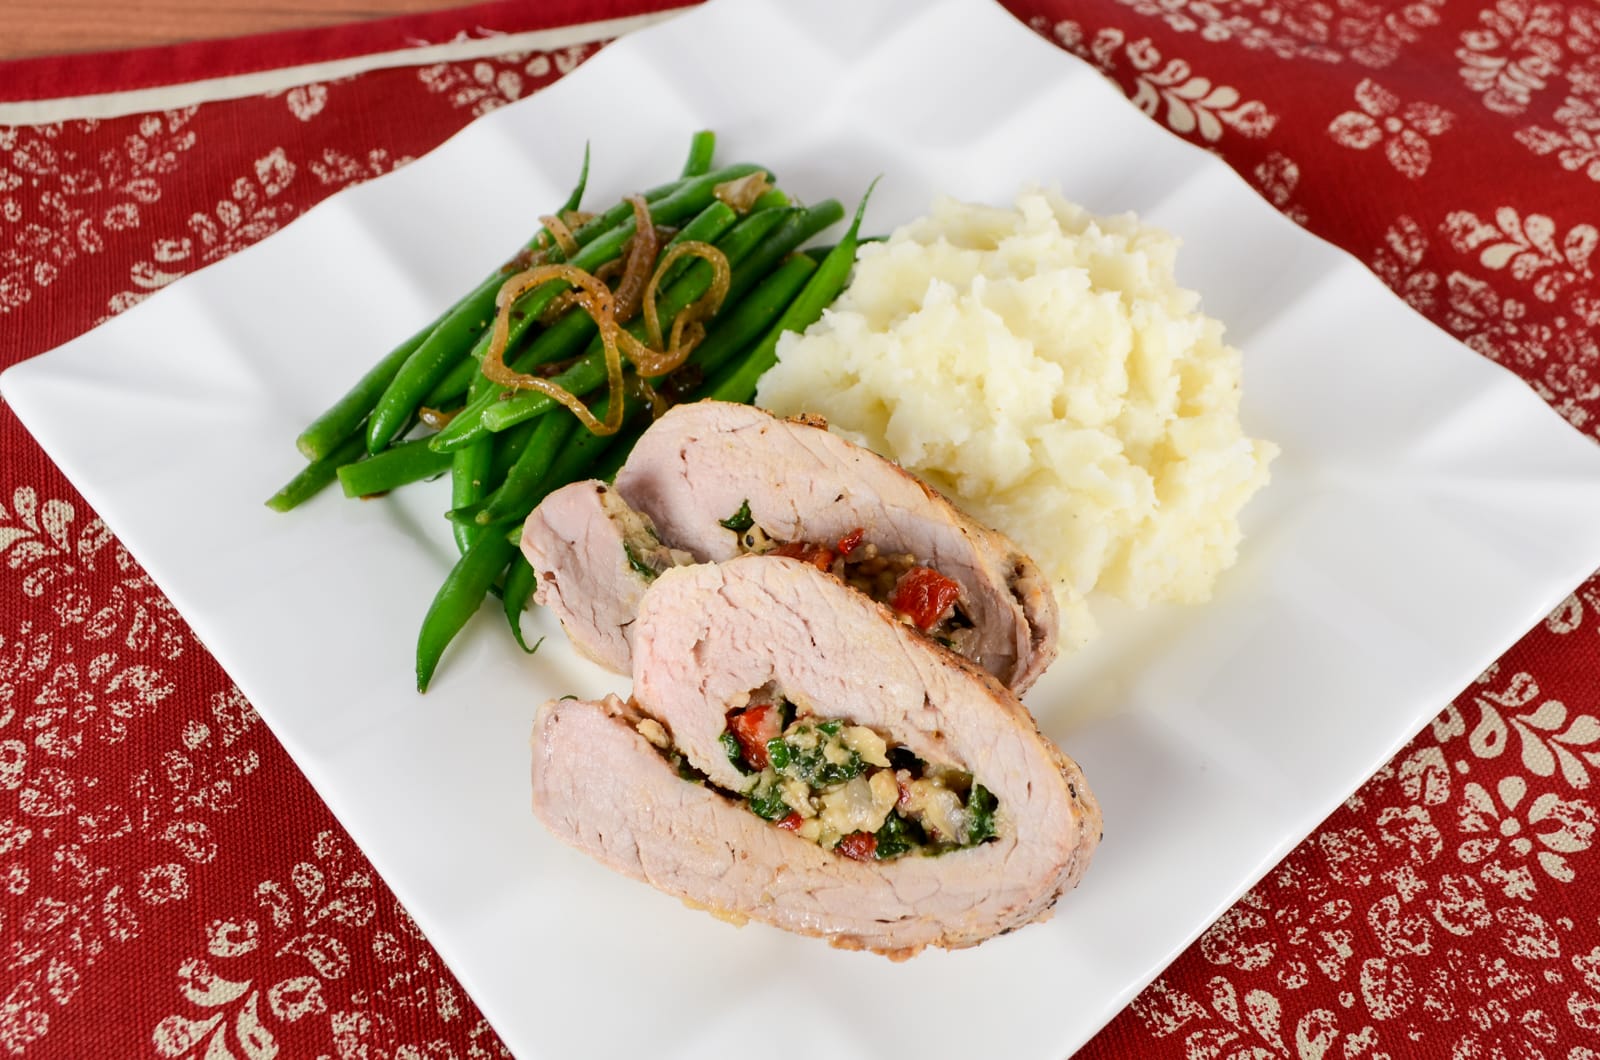 Pork Tenderloin Stuffed with Spinach, Roasted Bell Pepper, Mushroom, and Parmesan